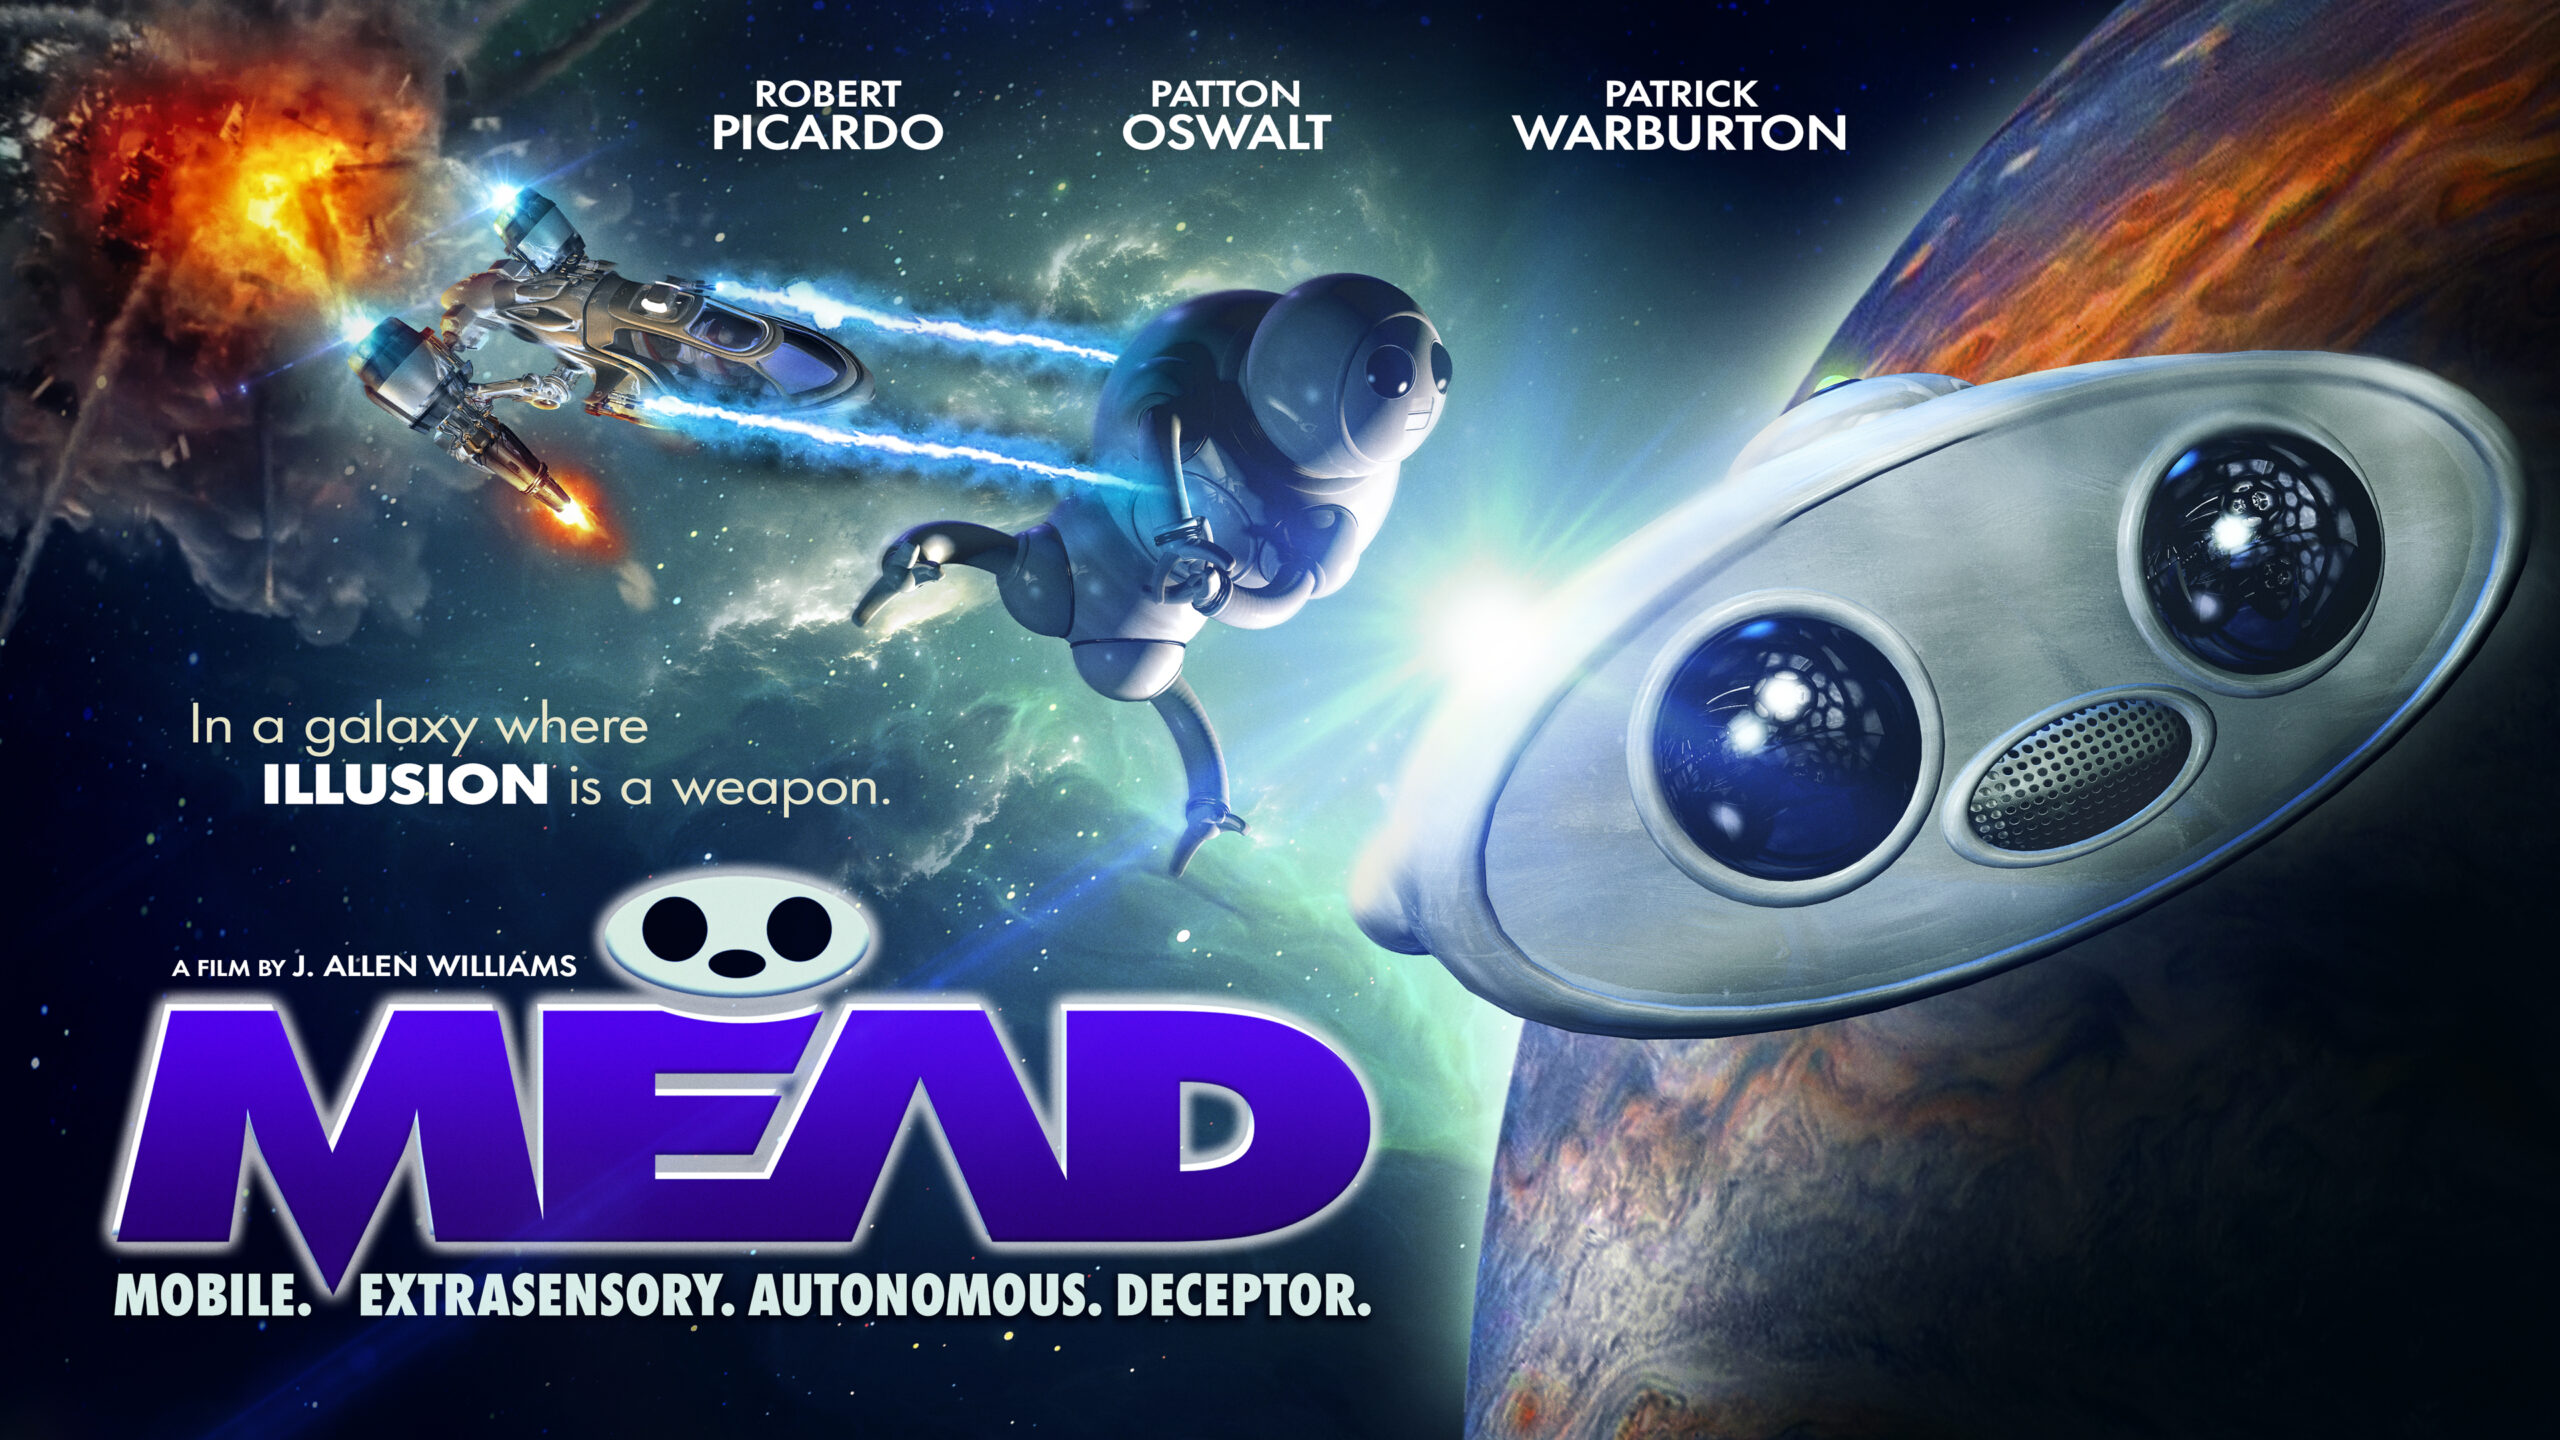 Vision Films to Release Sci-Fi ‘MEAD’ Based on Cult Classic Comic ‘Fever Dreams’